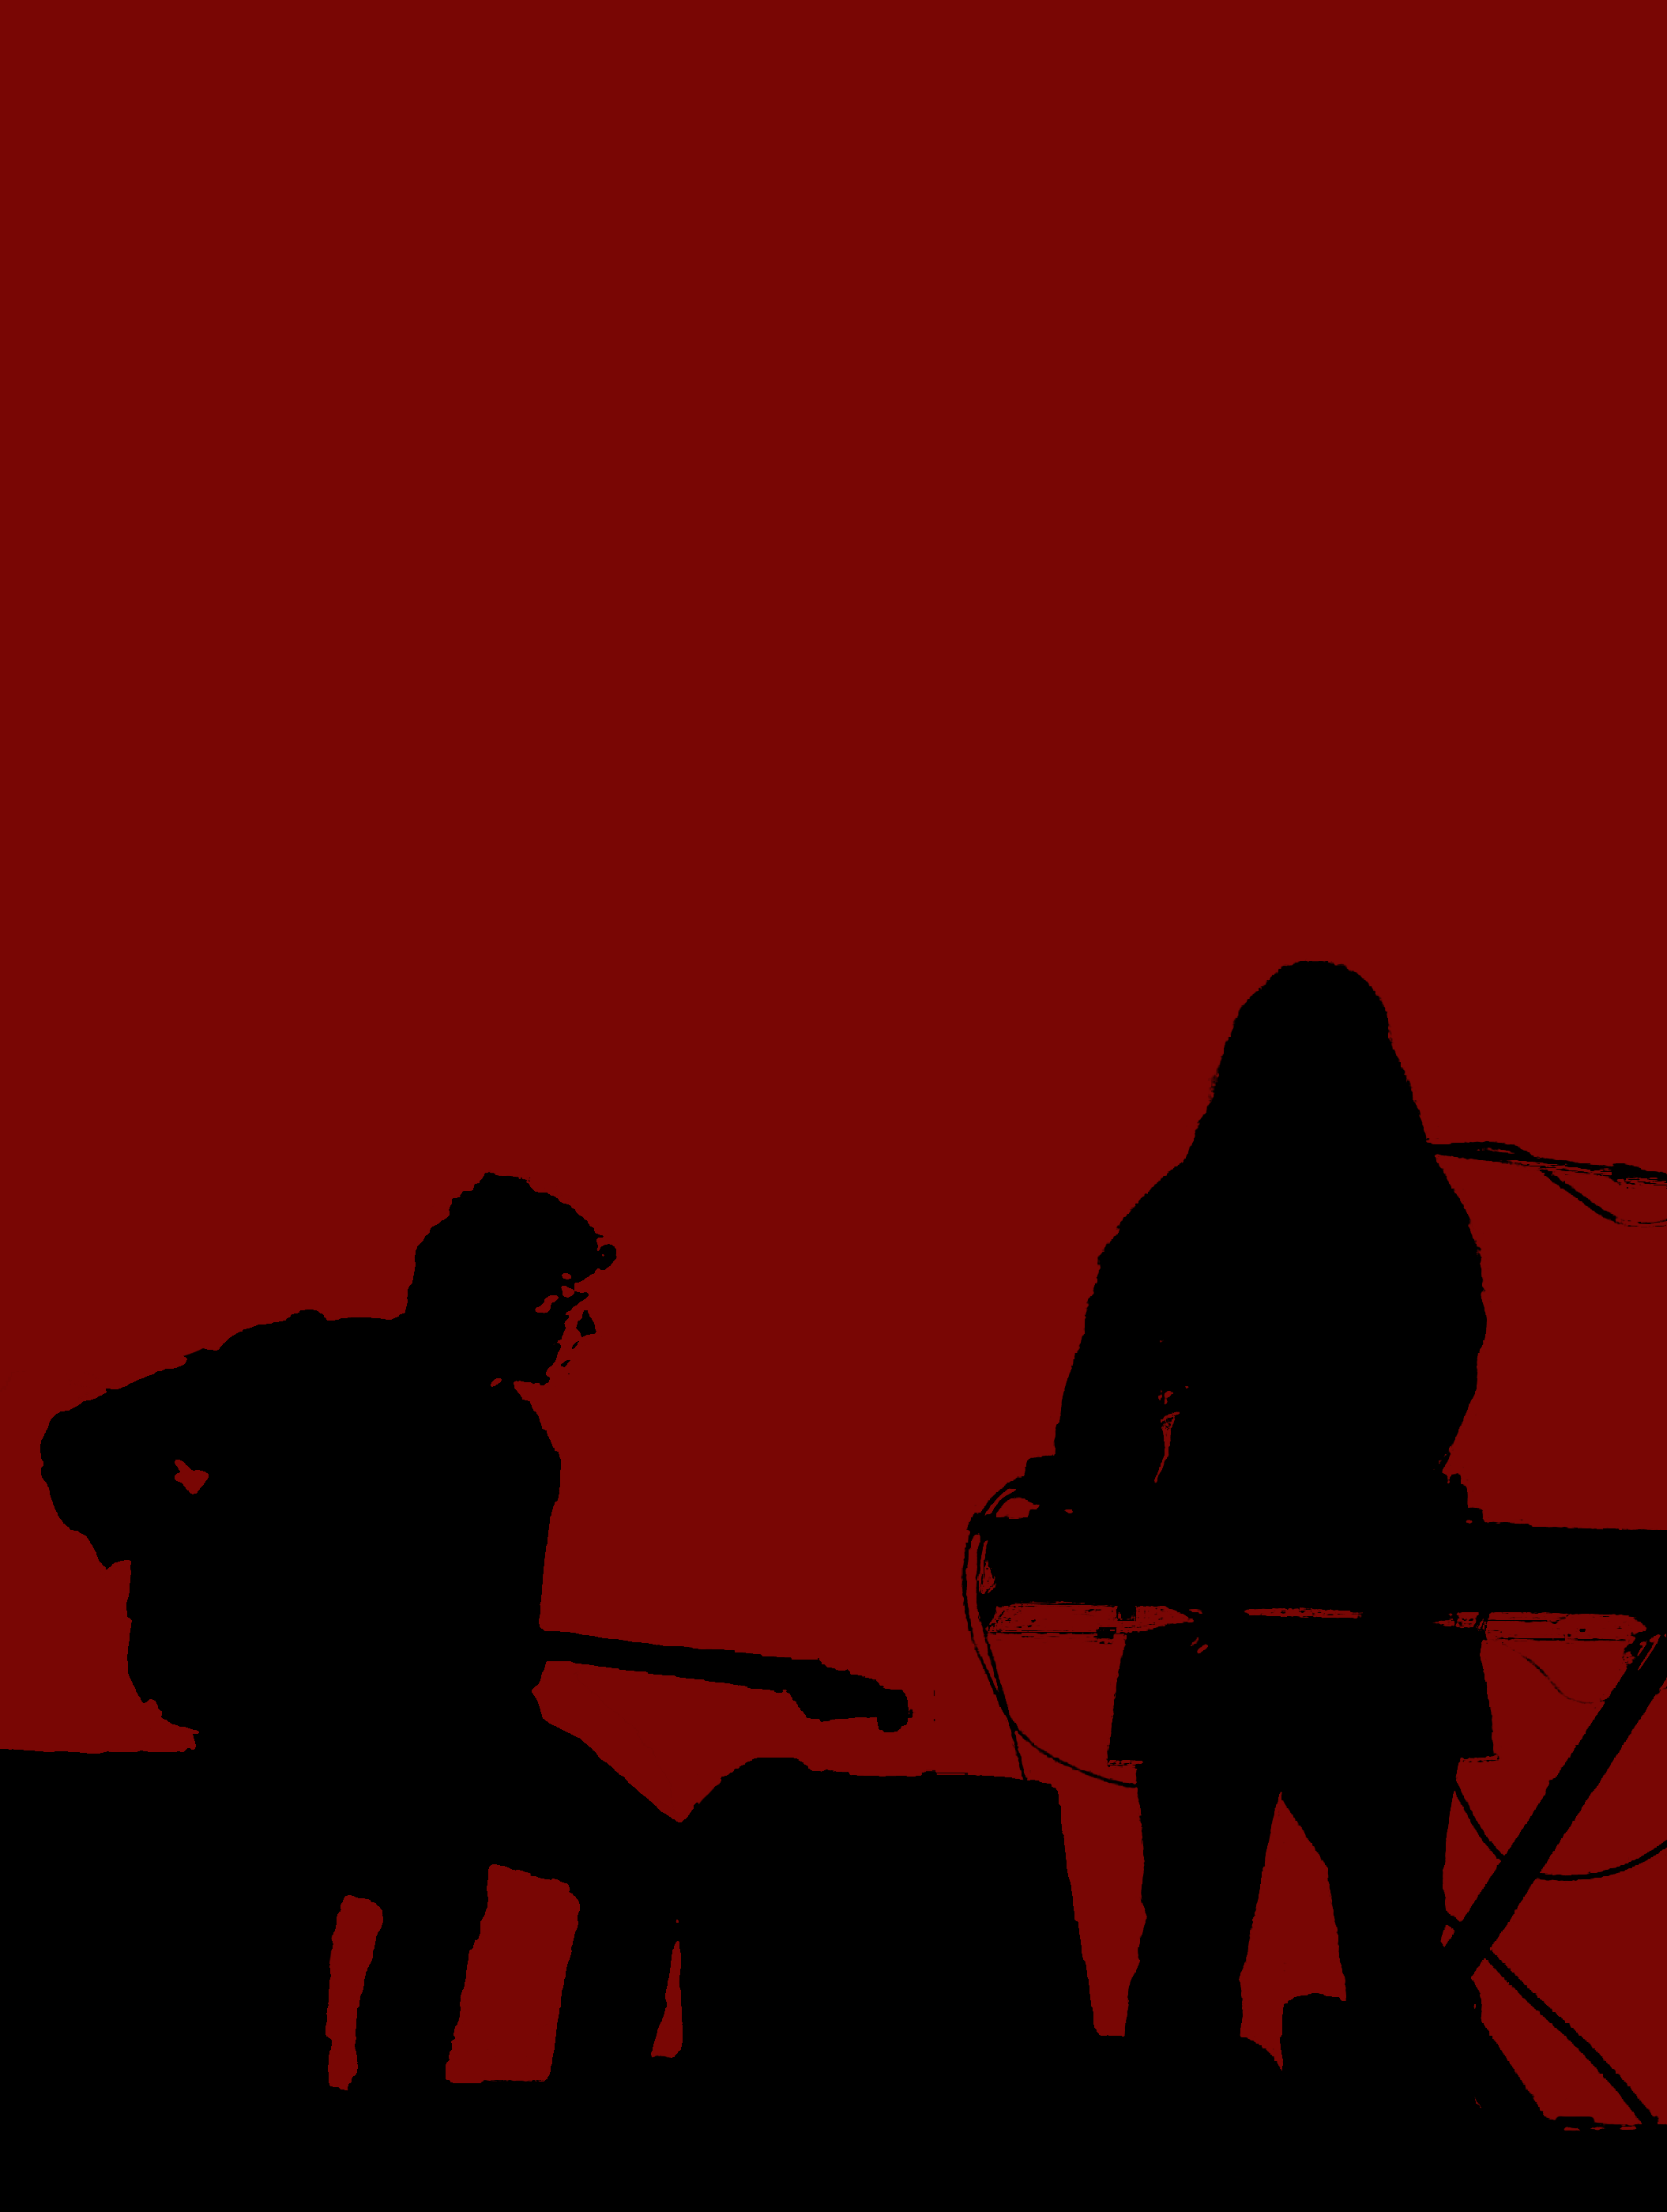 Beach House Phone Wallpaper I Did By Joining Two Of U Jacobjkj's Amazing Concert Photo